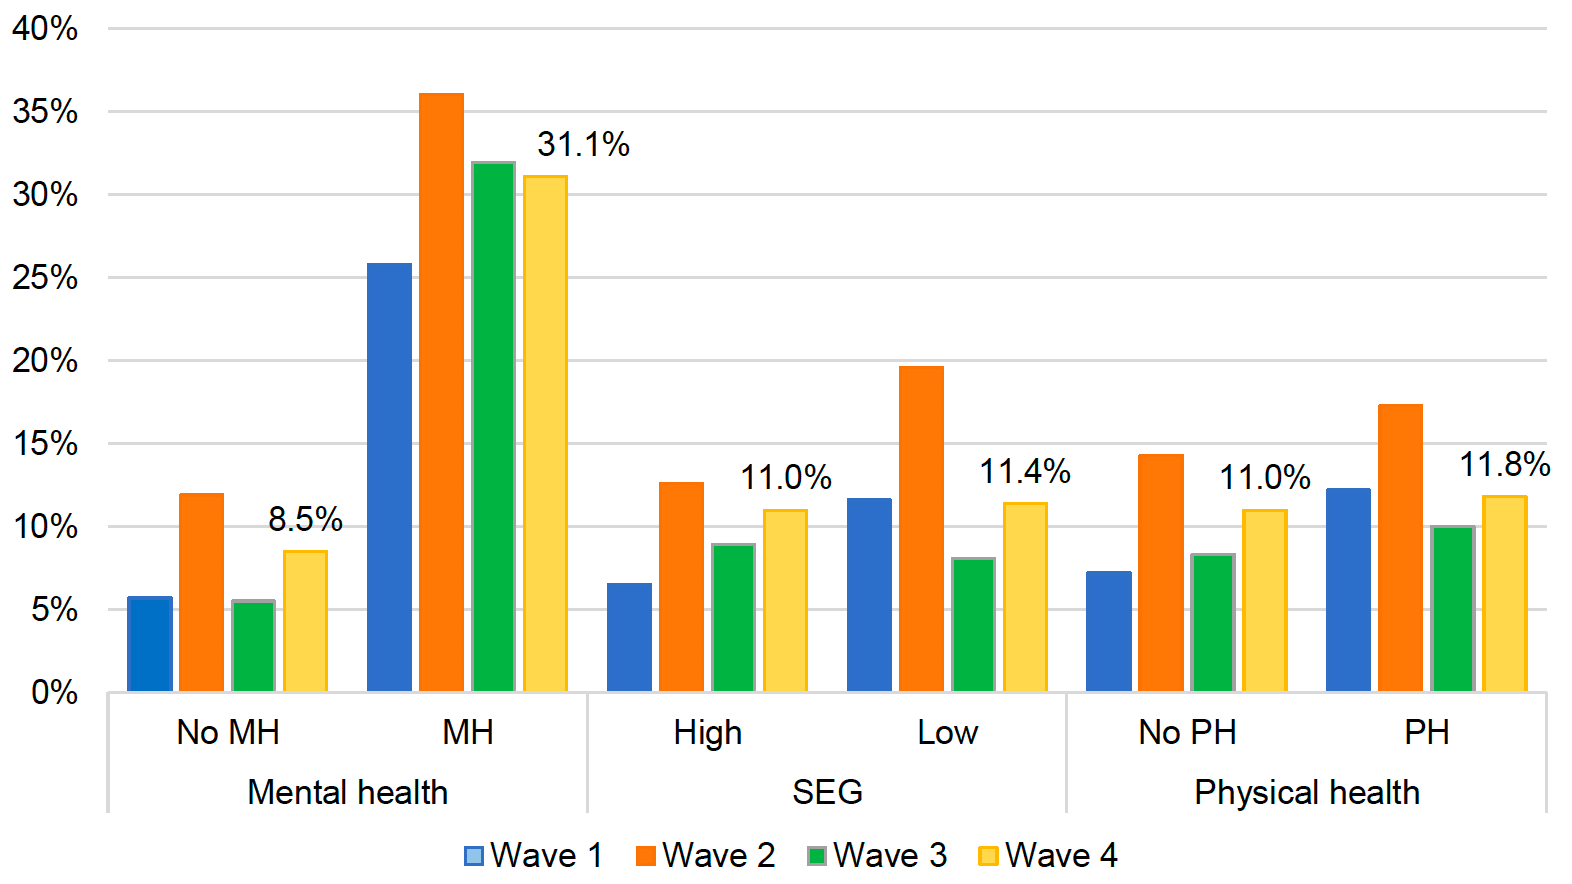 This histogram displays the percentages of reported suicidal thoughts in the week prior to the assessment within all four waves. The findings are presented separately for those who did or did not report a pre-existing mental health conditions, those of the high or low socio-economic group and those who reported or did not report a pre-existing physical health condition. The highest rates of suicidal thoughts in all four waves were found for participants with a pre-existing mental health condition (36% at Wave 2, 31.9% at Wave 3, 31.1% at Wave 4 and the lowest rate at Wave 1 with 25.8%). Participants from a low socio-economic group reported 19.6% suicidal thoughts at Wave 2, 11.6% suicidal thoughts at Wave 1, 11.4% suicidal thoughts at Wave 4 and 8.1% at Wave 3. In comparison, participants of a high socio-economic group reported 12.6% suicidal thoughts at Wave 2, 11% a Wave 4, 8.9% at Wave 3 and 6.5% at Wave 1. Participants with a pre-existing physical health condition reported 17.3% suicidal thoughts at Wave 2, 12.2% at Wave 1, 11.8% at Wave 4 and 10.0% at Wave 3. Participants without a pre-existing health condition reported 14.3% suicidal thoughts at Wave 2, 11.0% at Wave 4, 8.3% at Wave 3 and 7.2% at Wave 1. Finally, participants without a pre-existing mental health condition reported 11.9% suicidal thoughts at Wave 2, 8.5% at Wave 4, 5.7% at Wave 1 and 5.5% at Wave 3. 